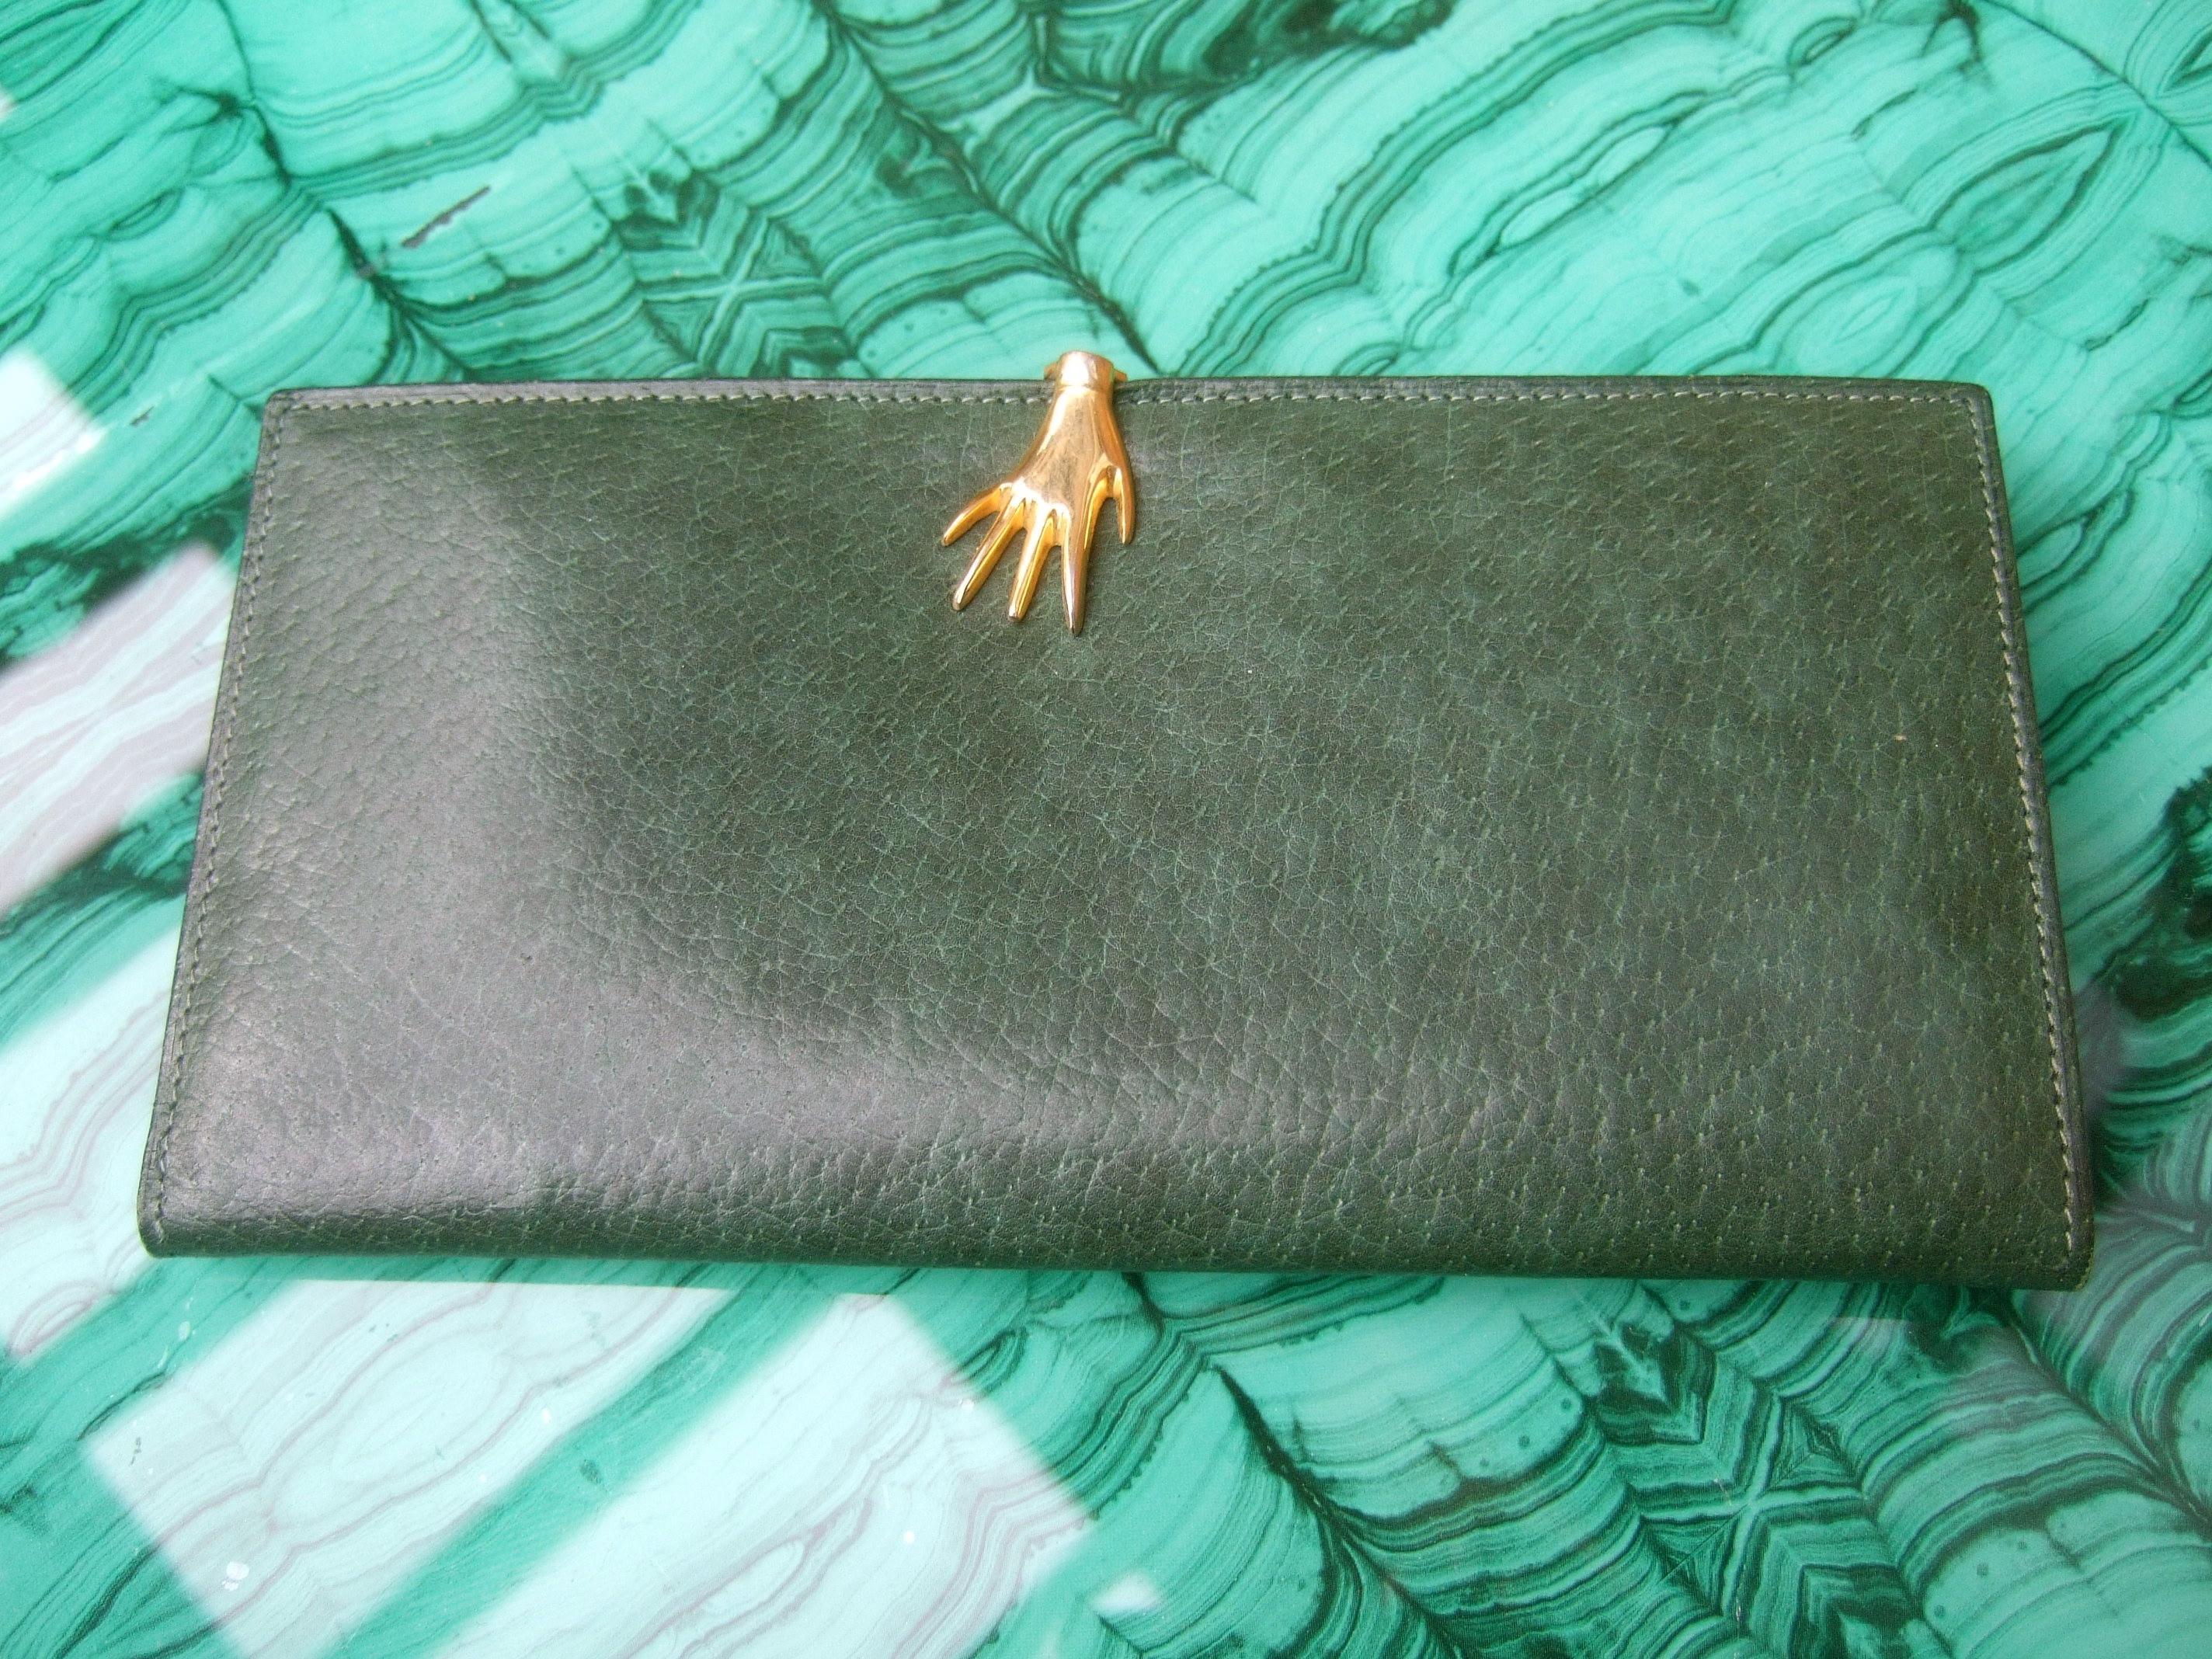 Gucci Italy Rare green pigskin leather hand clasp wallet in Gucci presentation box c 1970s
The stylish muted green leather wallet is adorned with a small gilt metal hand clasp closure
The interior is designed with twin slip pocket compartments 

The